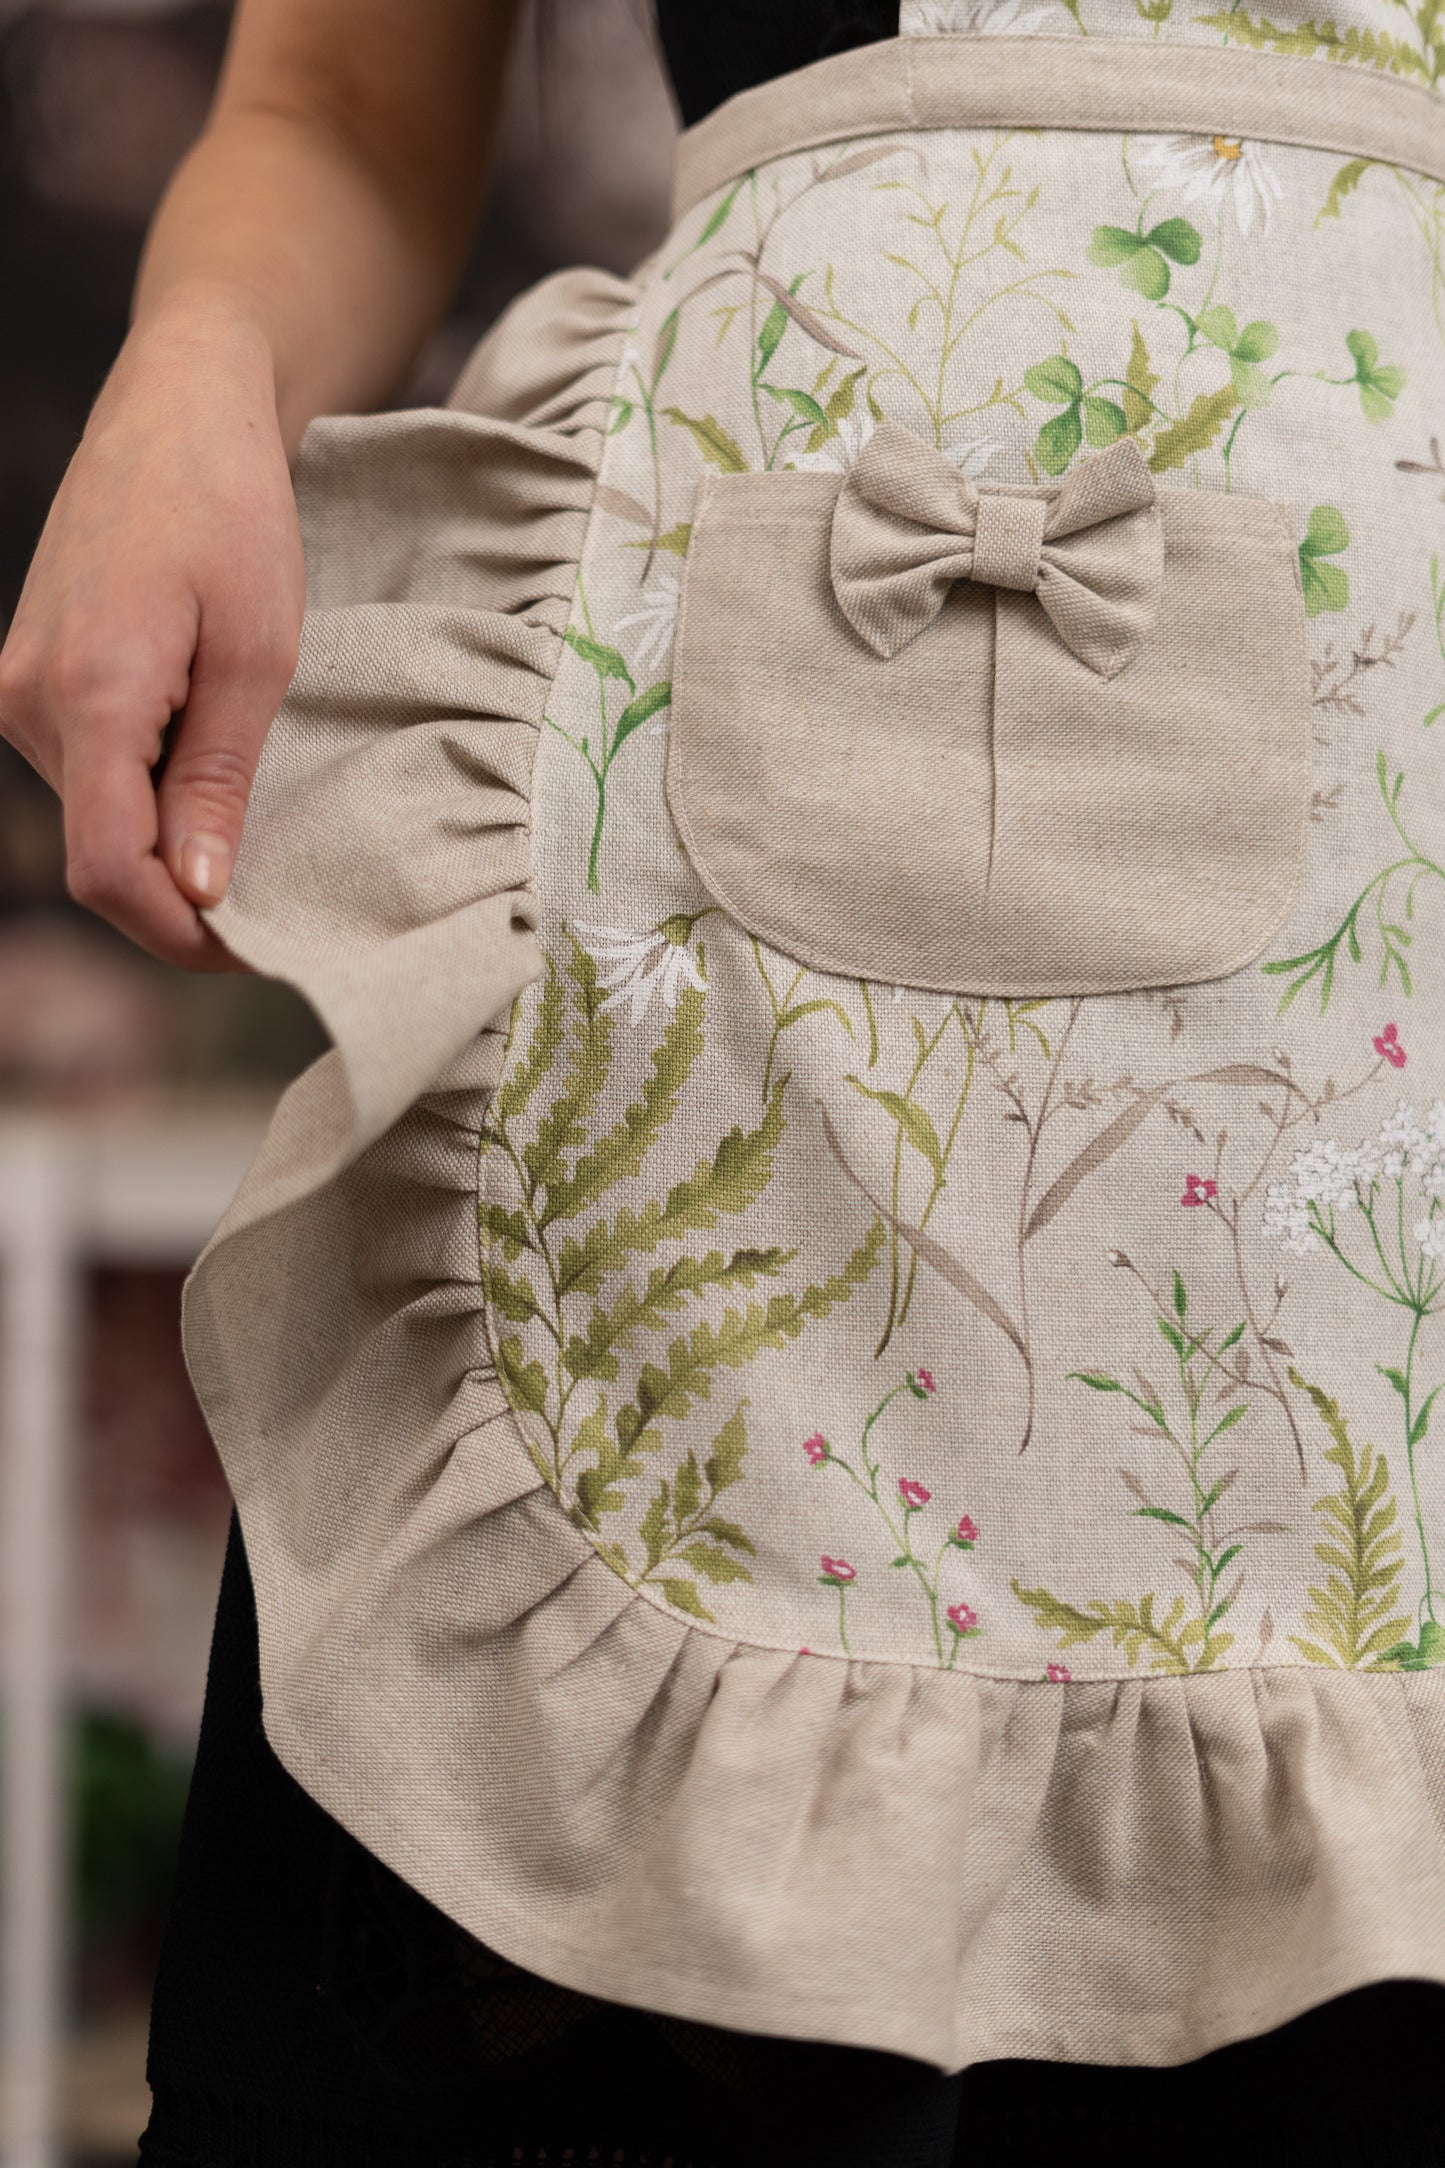 Ladies Half Apron with Ruffles, Poly-Cotton Mix, Printed | Meadow Flowers